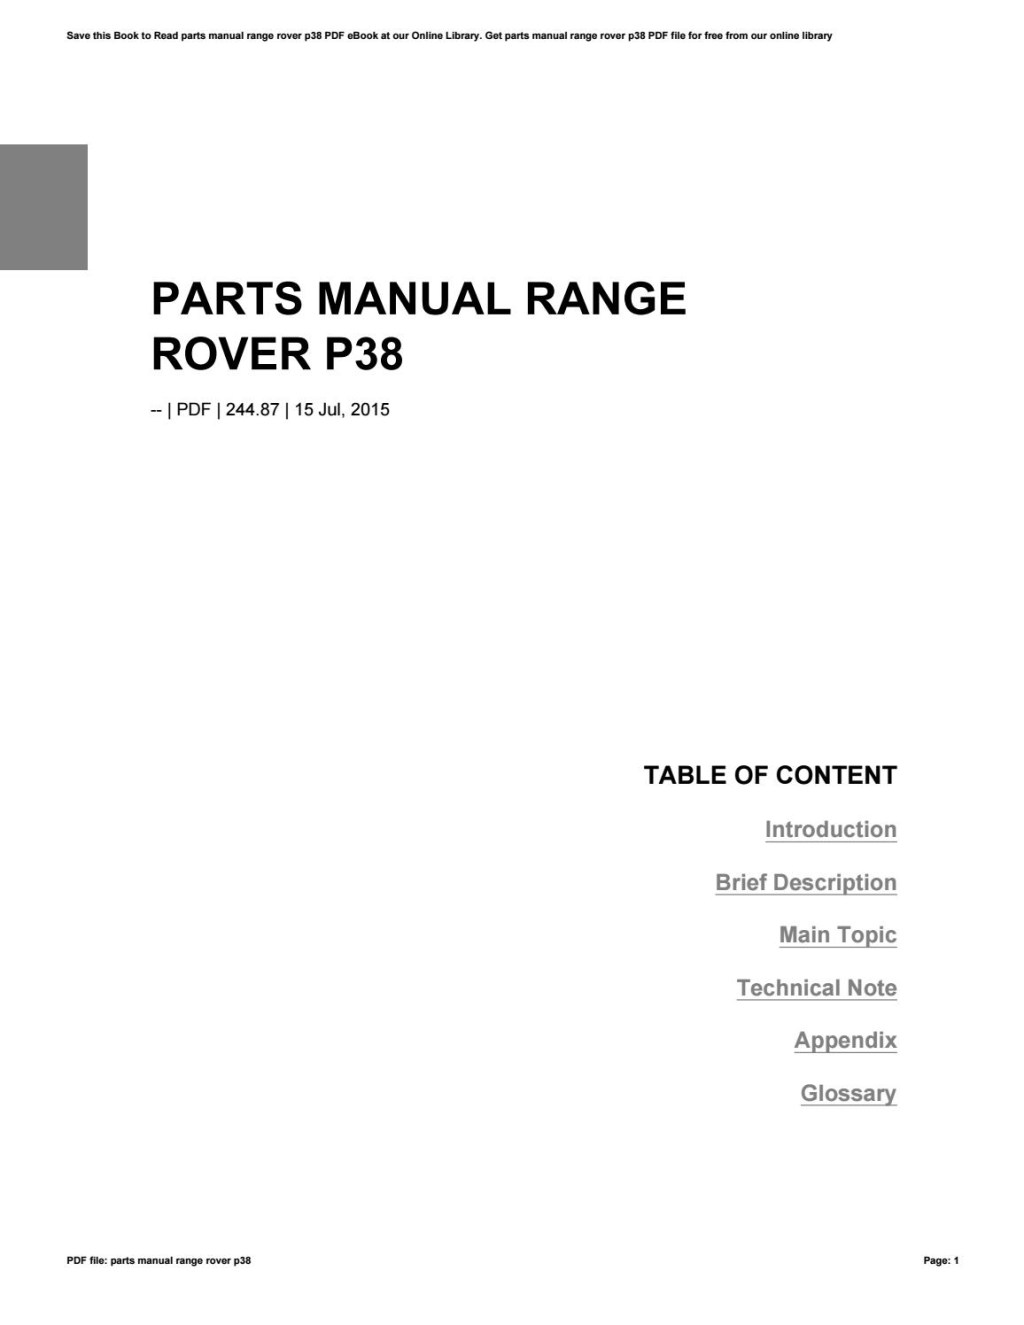 Picture of: Parts manual range rover p by nezzart – Issuu